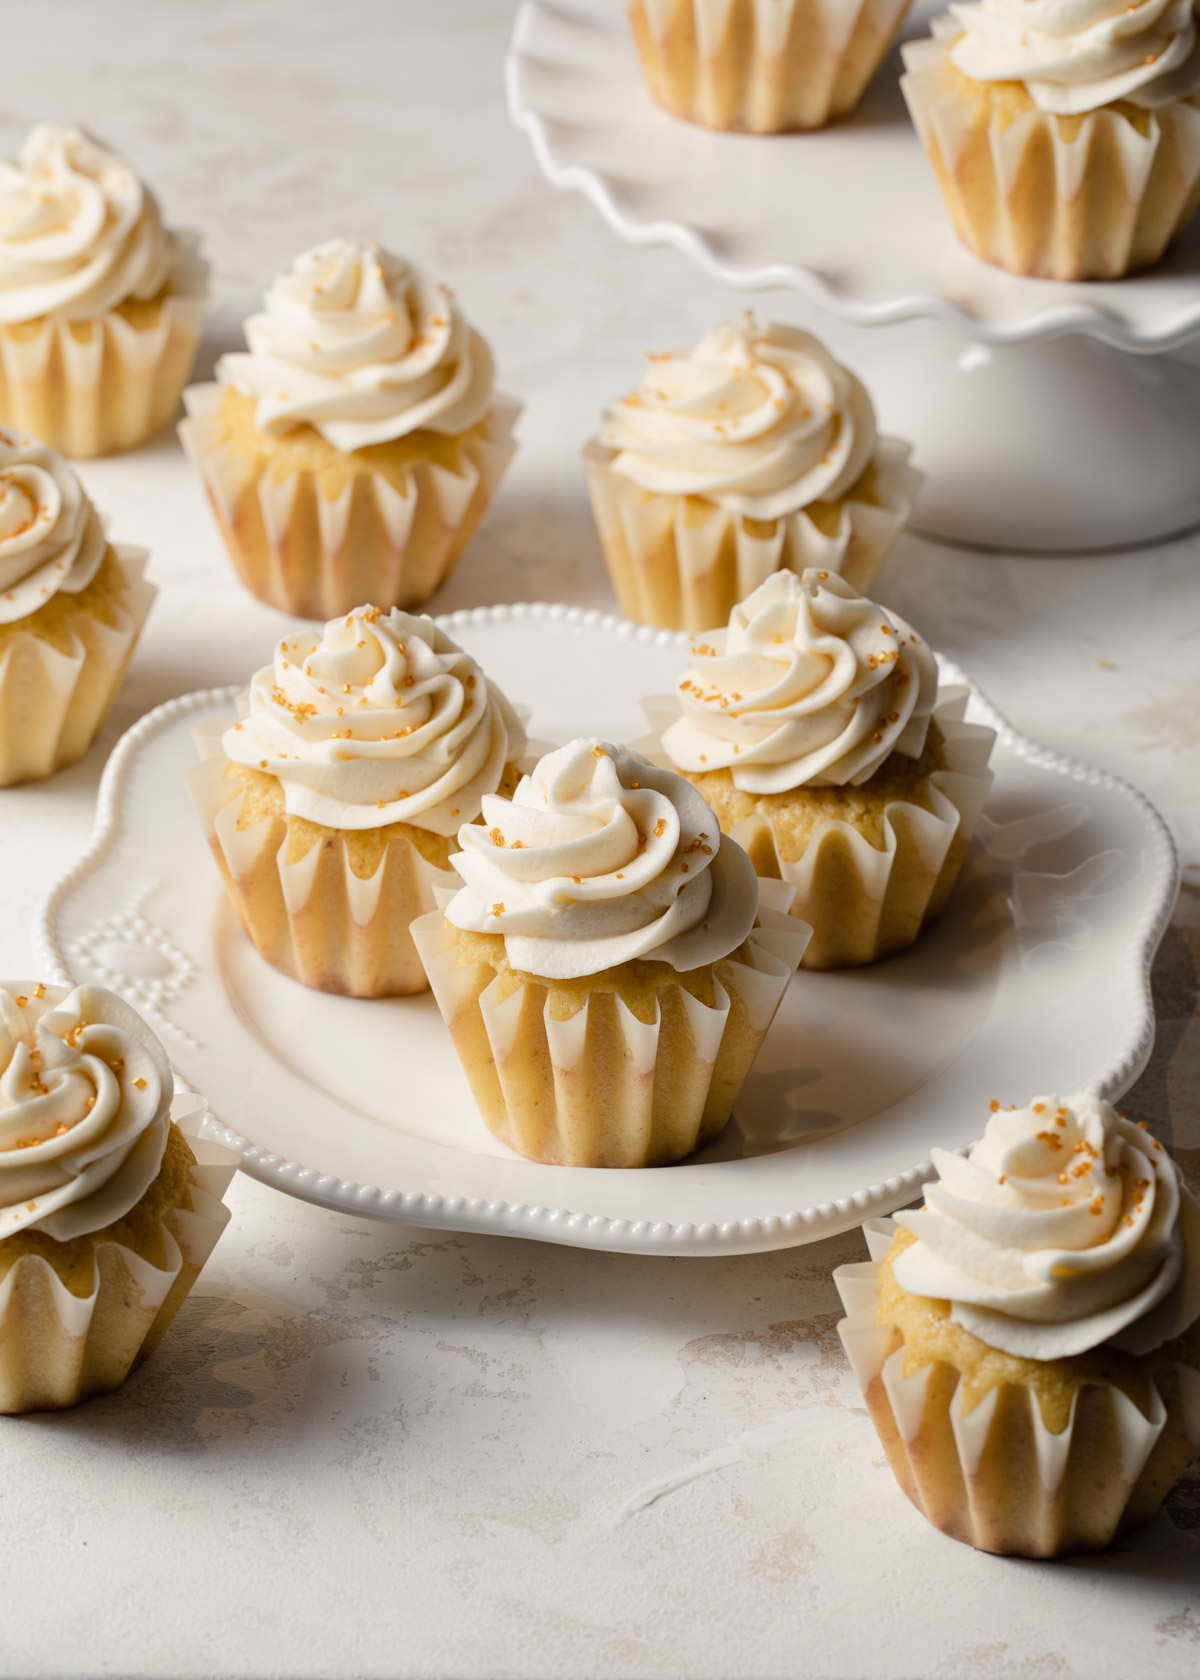 A platter of brown butter cupcakes with swirls of vanilla icing on top